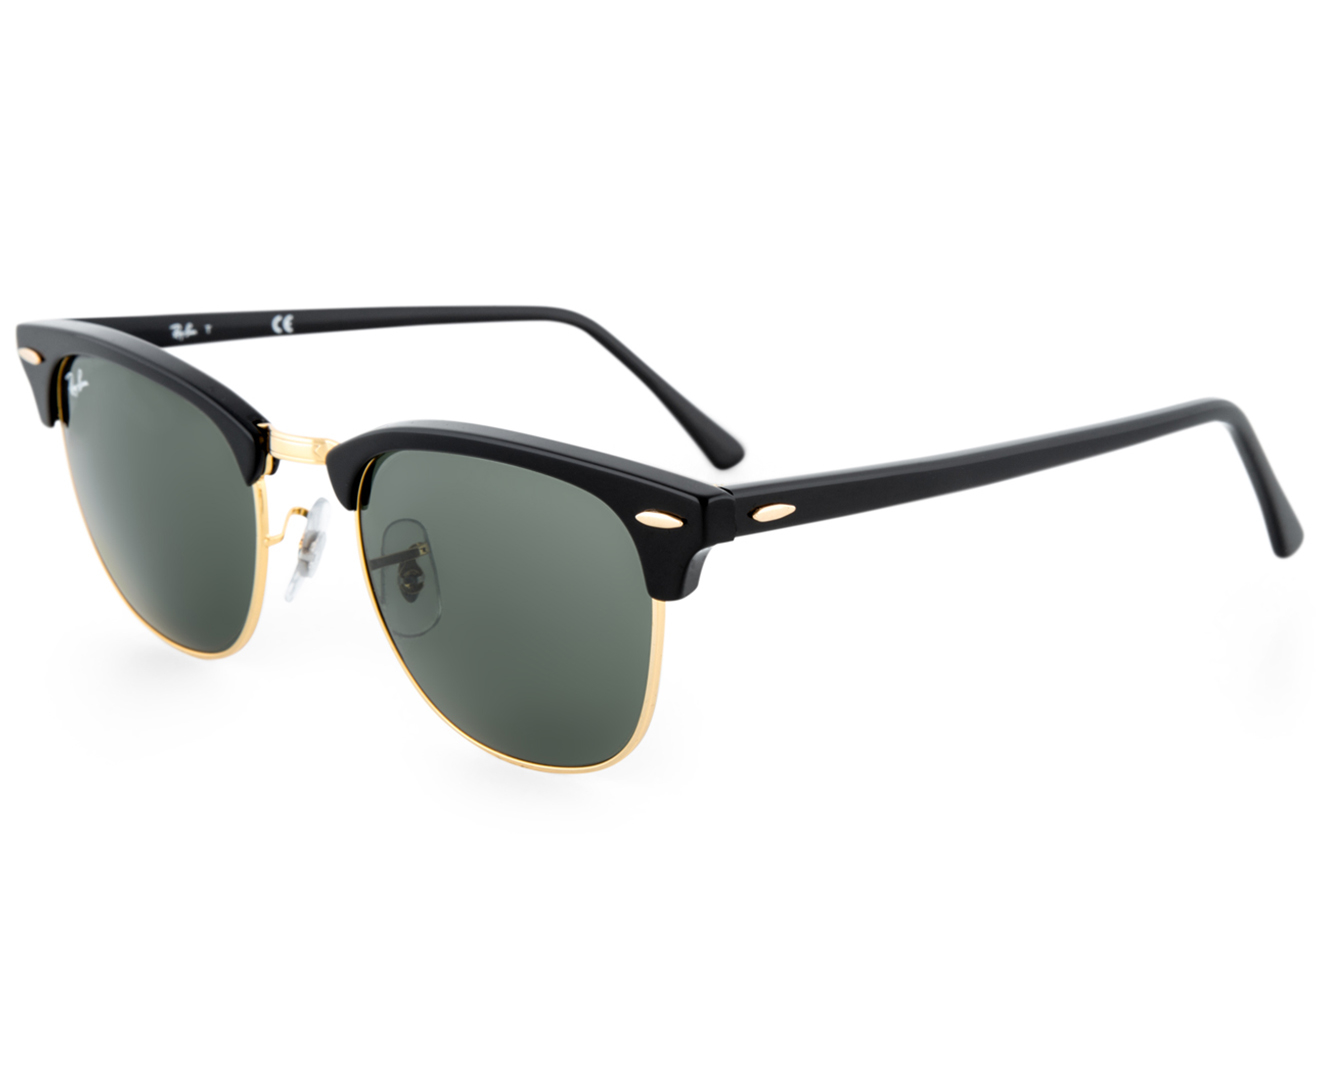 ray ban classic clubmaster sunglasses